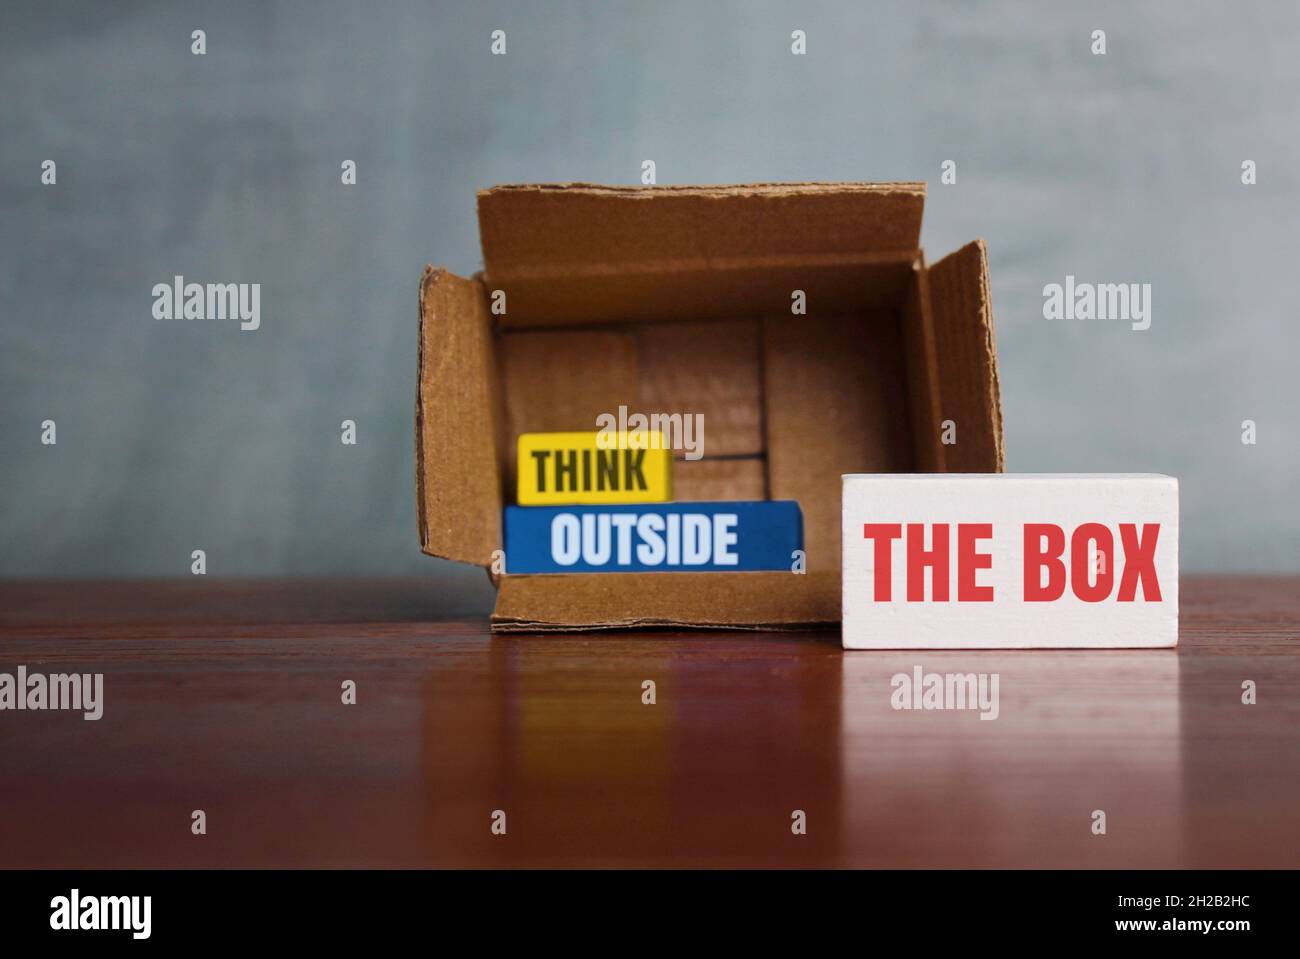 Think differently, unconventionally, or a new perspective concept. Box and wooden cube with text THINK OUTSIDE THE BOX Stock Photo